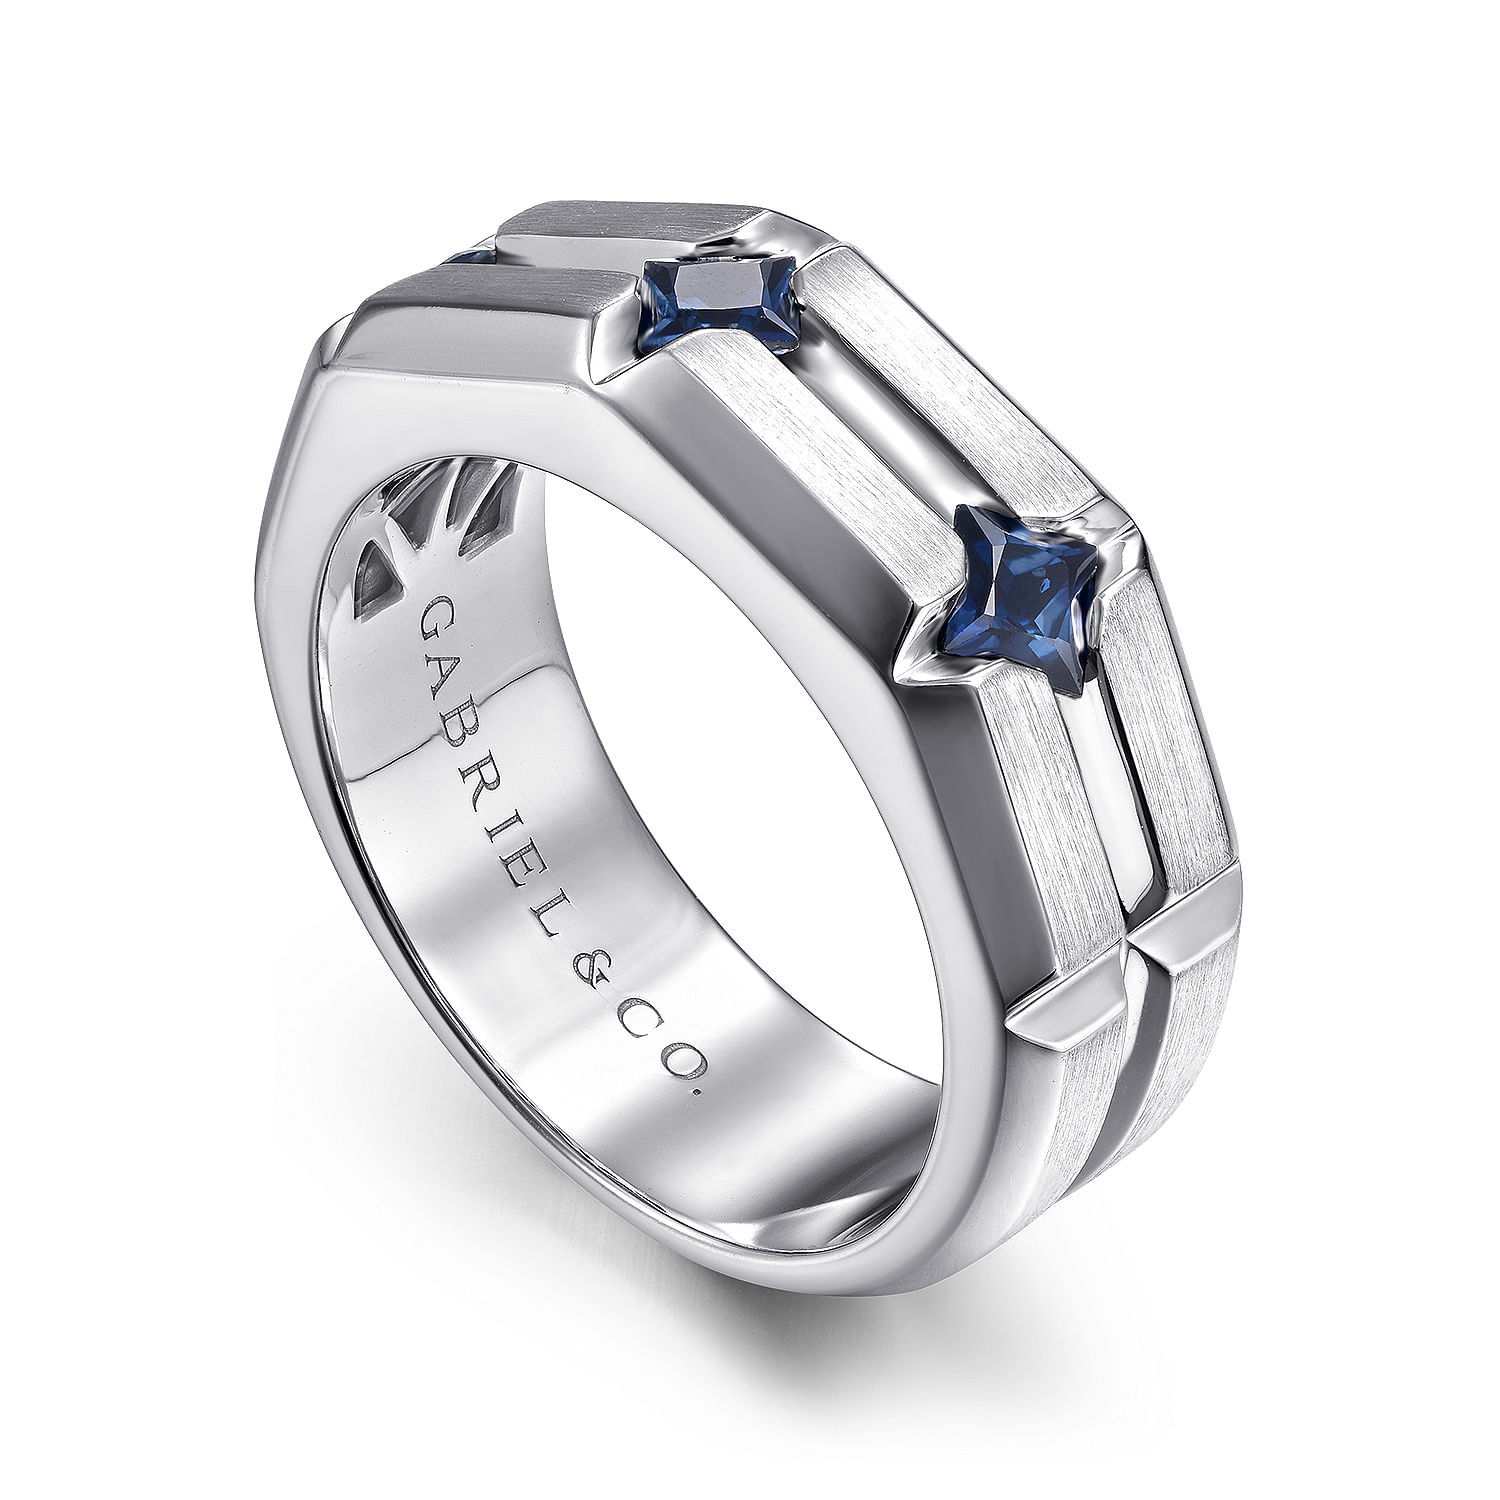 925 Sterling Silver Ring with Princess Cut Sapphire B quality Stations in Horizontal Brush Finish